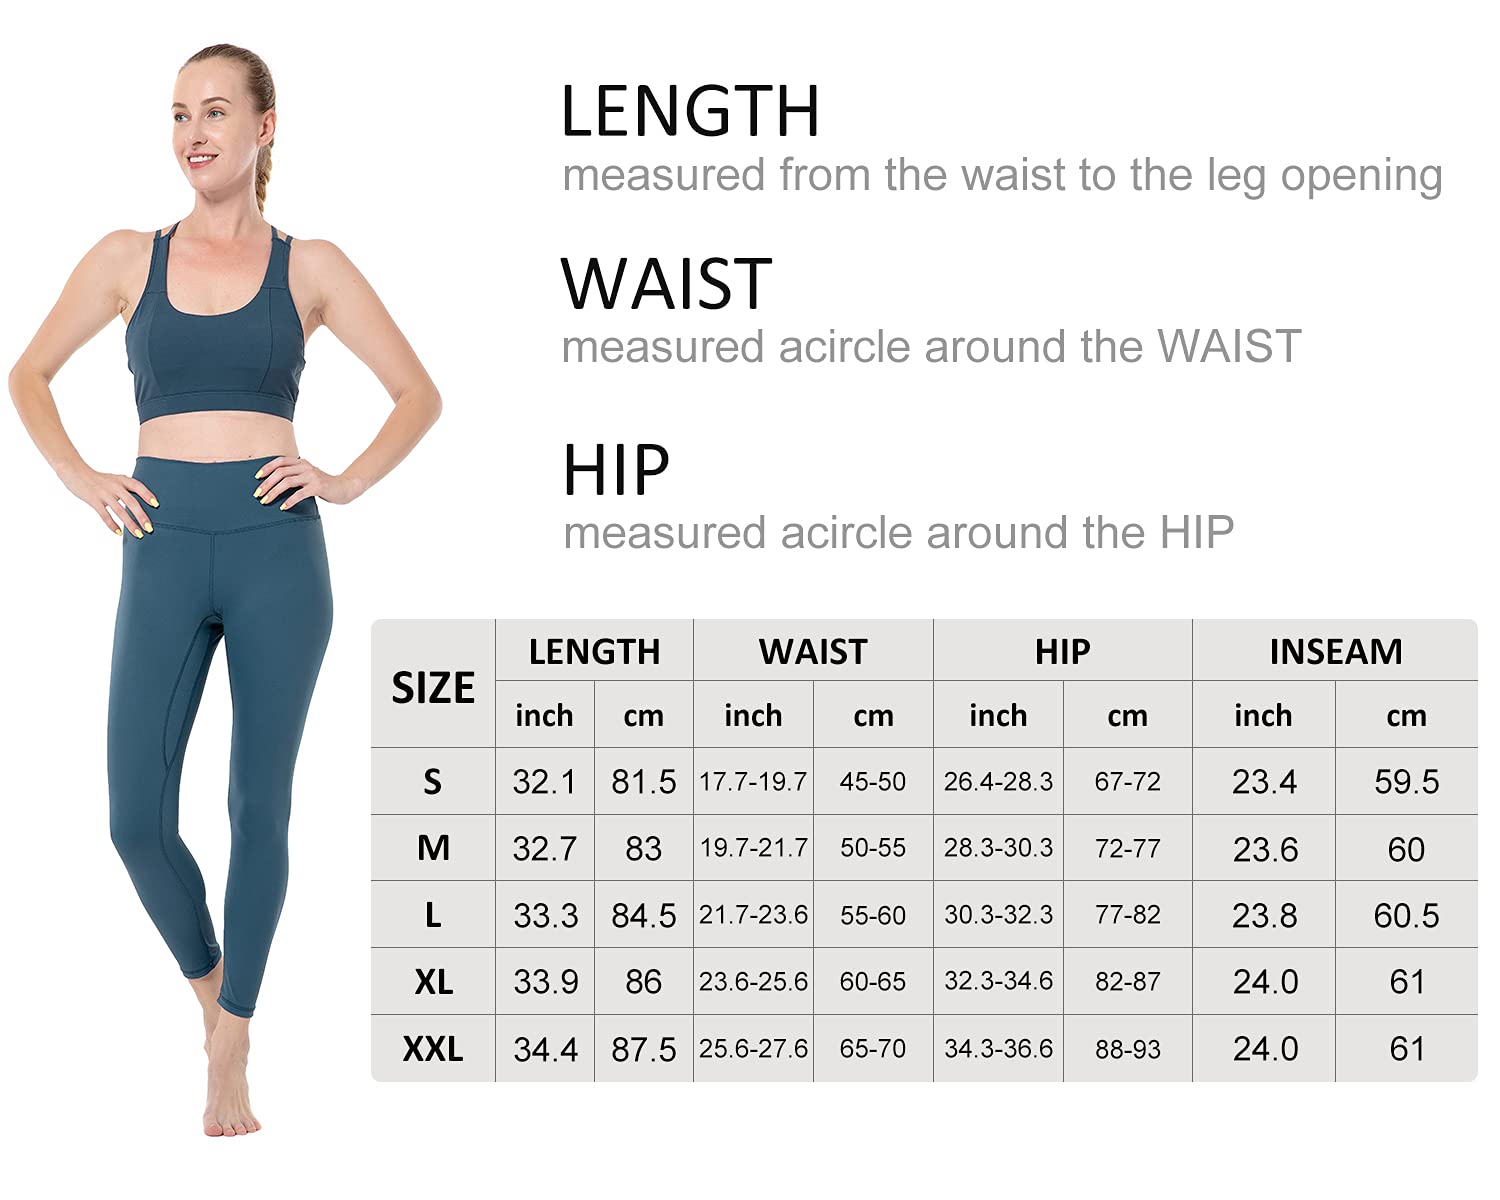 Yoga Pants Seamless Leggings Size M High Waist Workout Pants With Inner Pockets, - Opticdeals